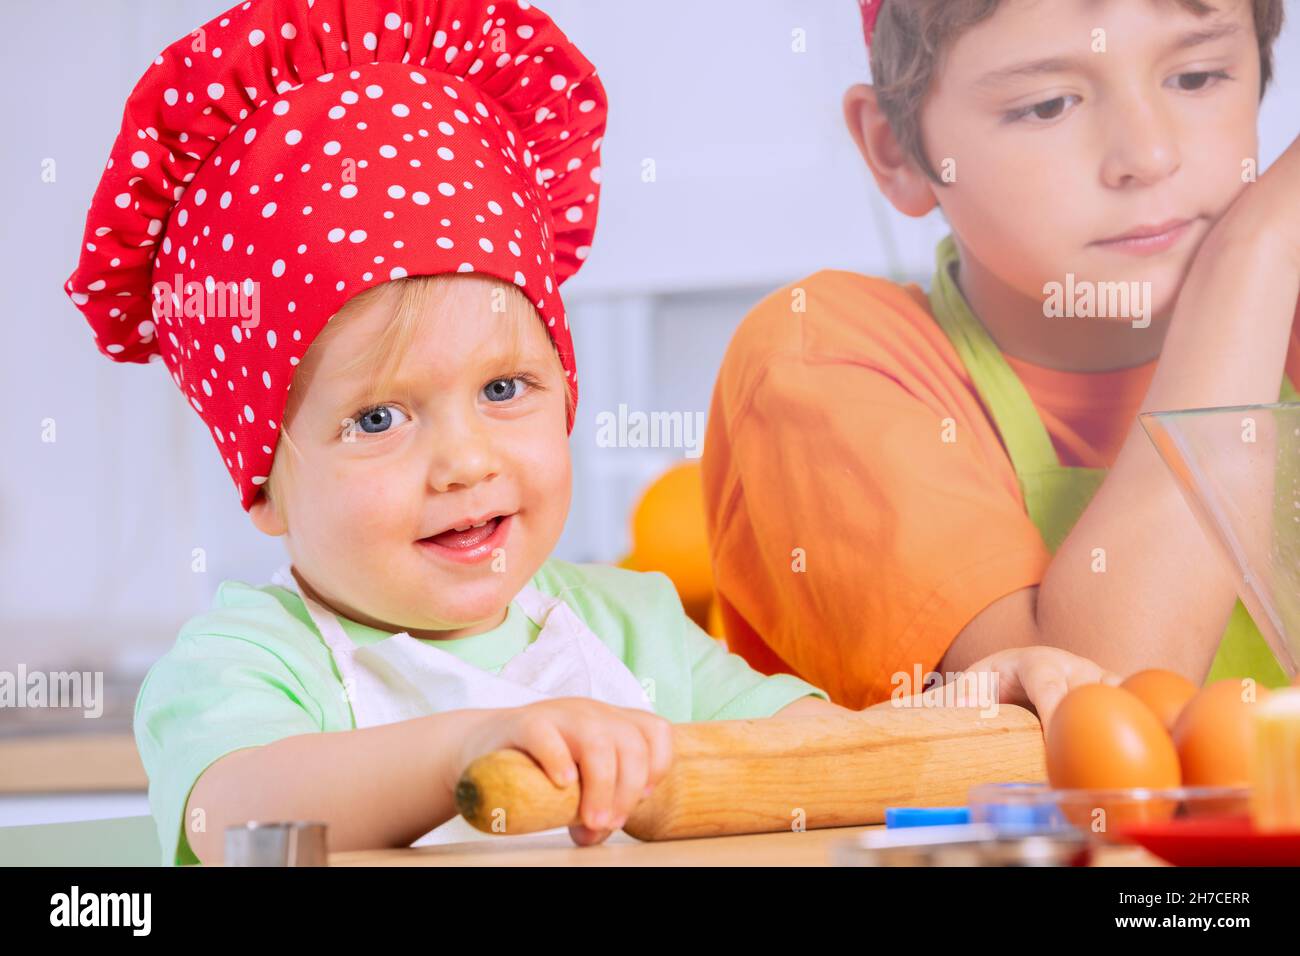 Small toddler boy roll dough plunger in chef hat Stock Photo